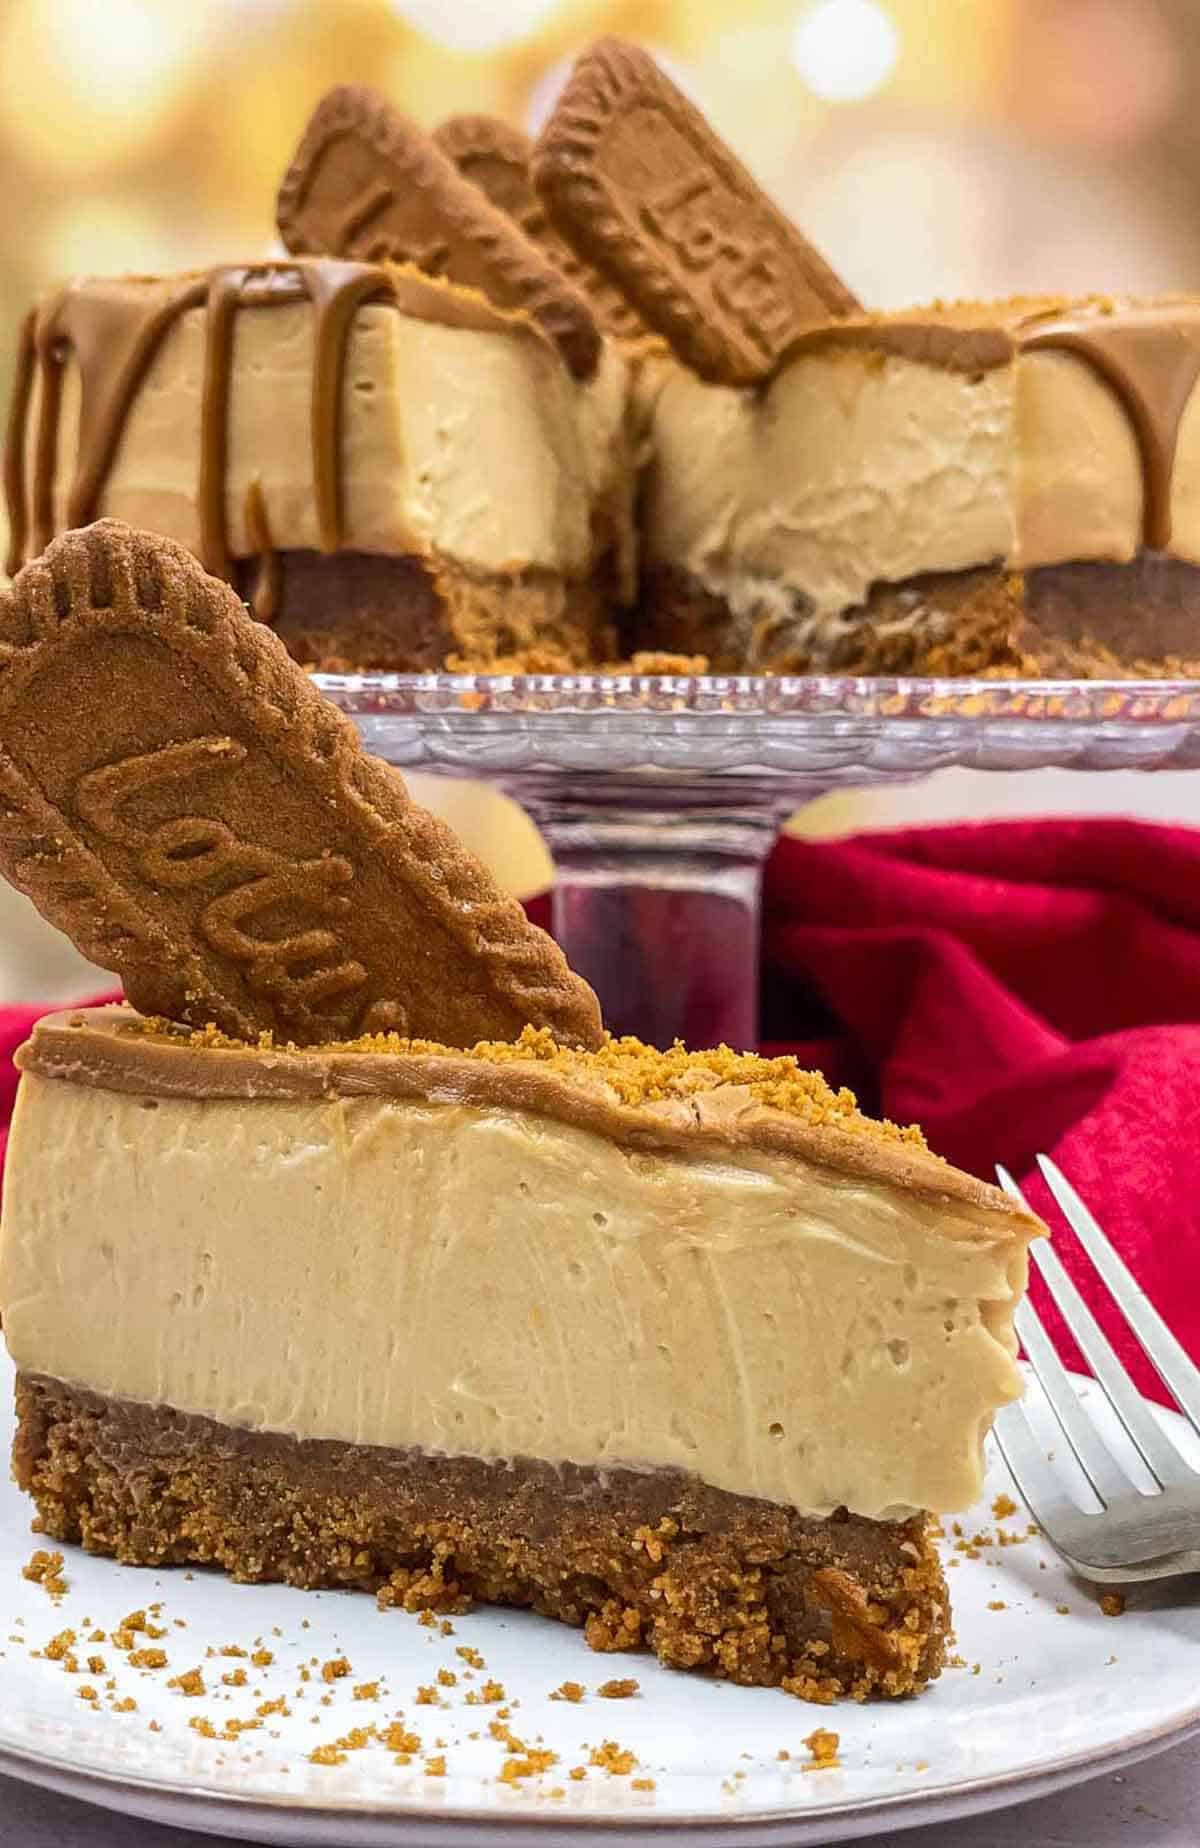 A slice of vegan Biscoff cheesecake on a plate with the rest of the cheesecake on a cake stand.